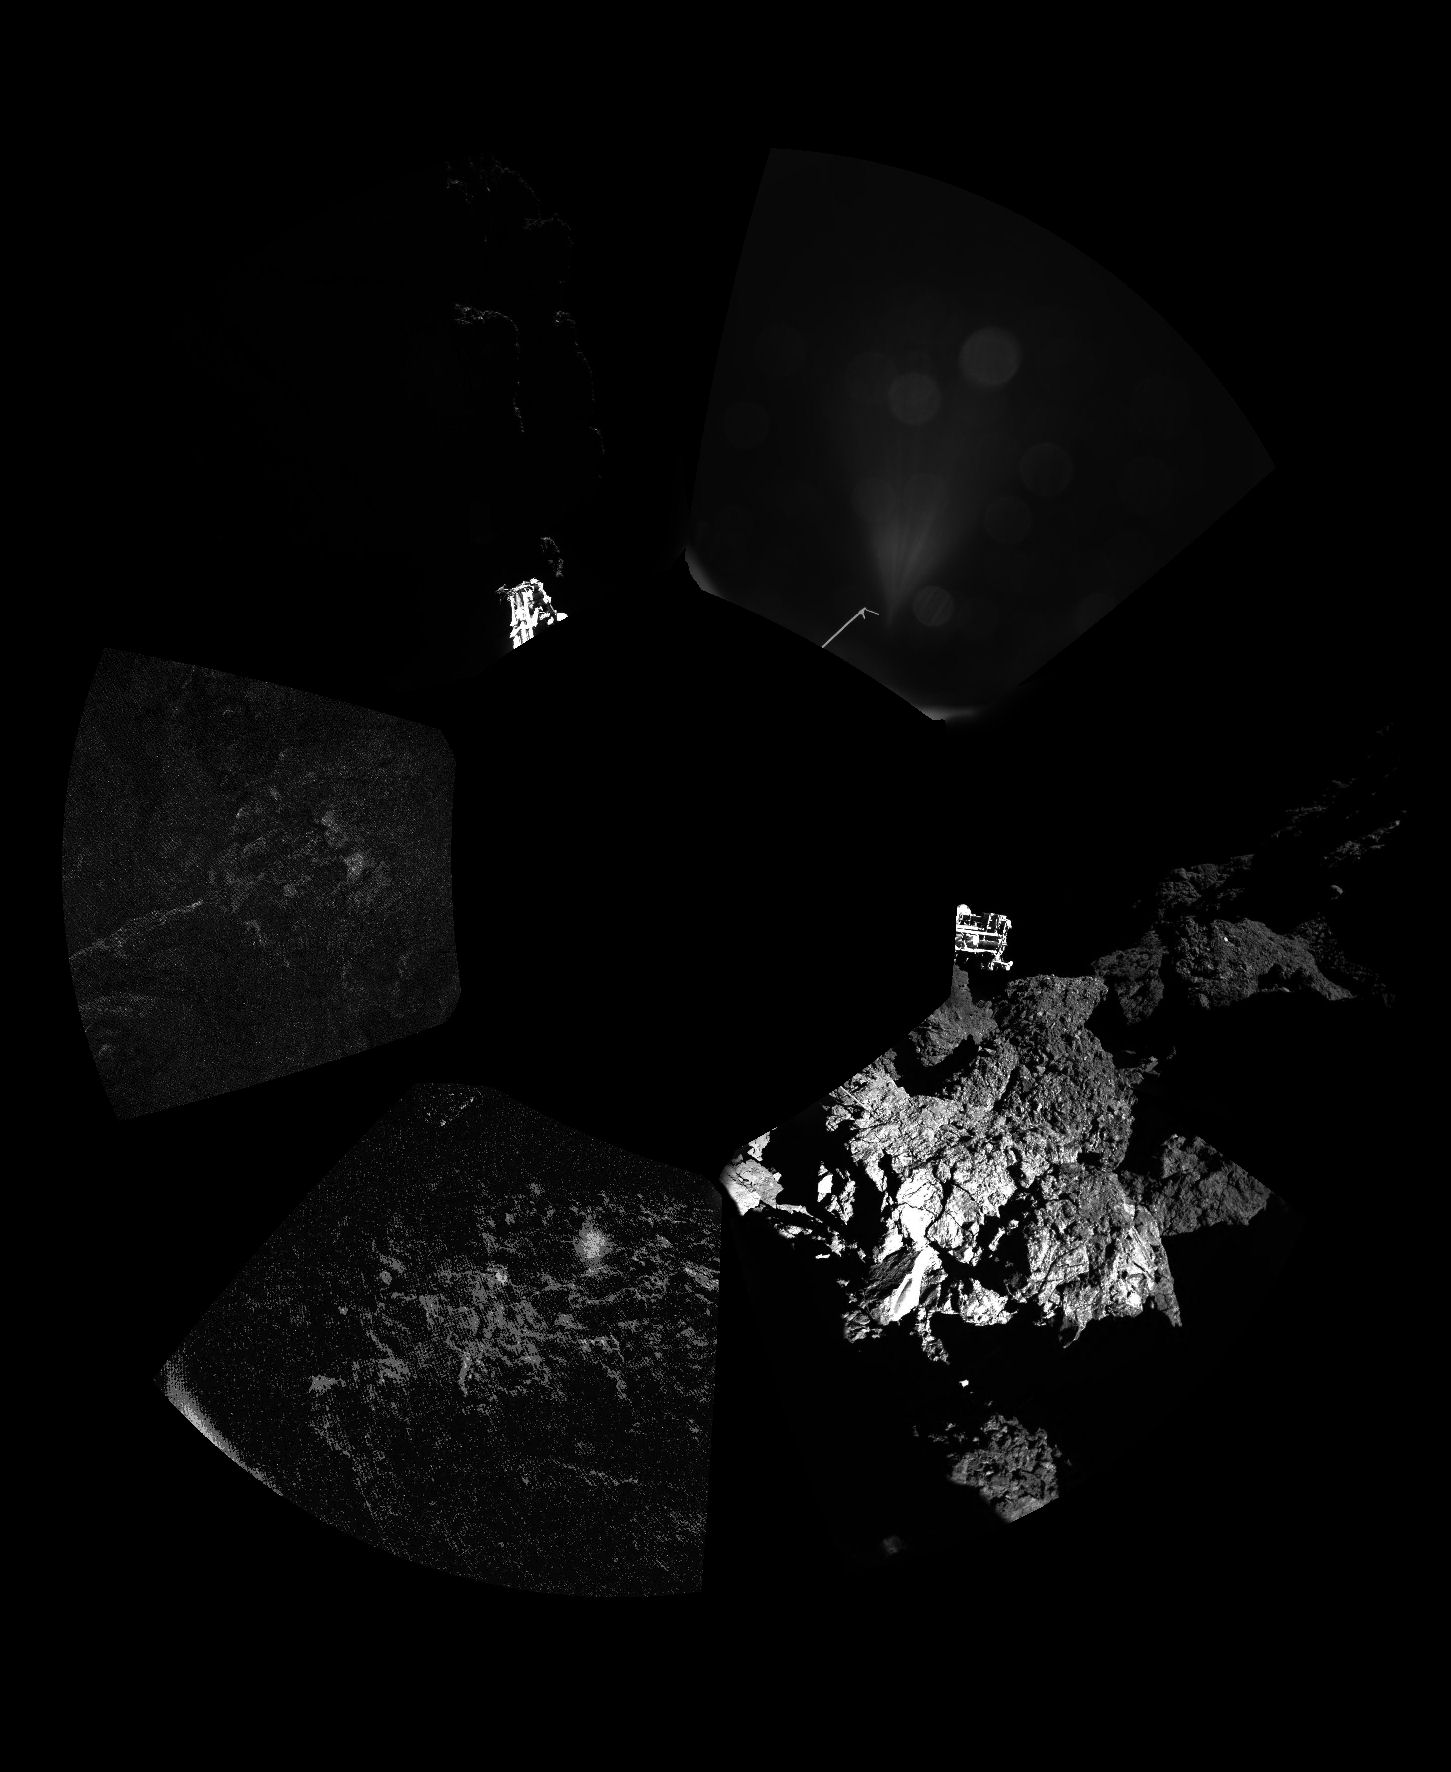 From ESA in November 2014: "Rosetta’s lander Philae has returned the first panoramic image from the surface of a comet. The view, unprocessed, as it has been captured by the CIVA-P imaging system, shows a 360º view around the point of final touchdown. The three feet of Philae’s landing gear can be seen in some of the frames." Image Credit: ESA/Rosetta/Philae/CIVA